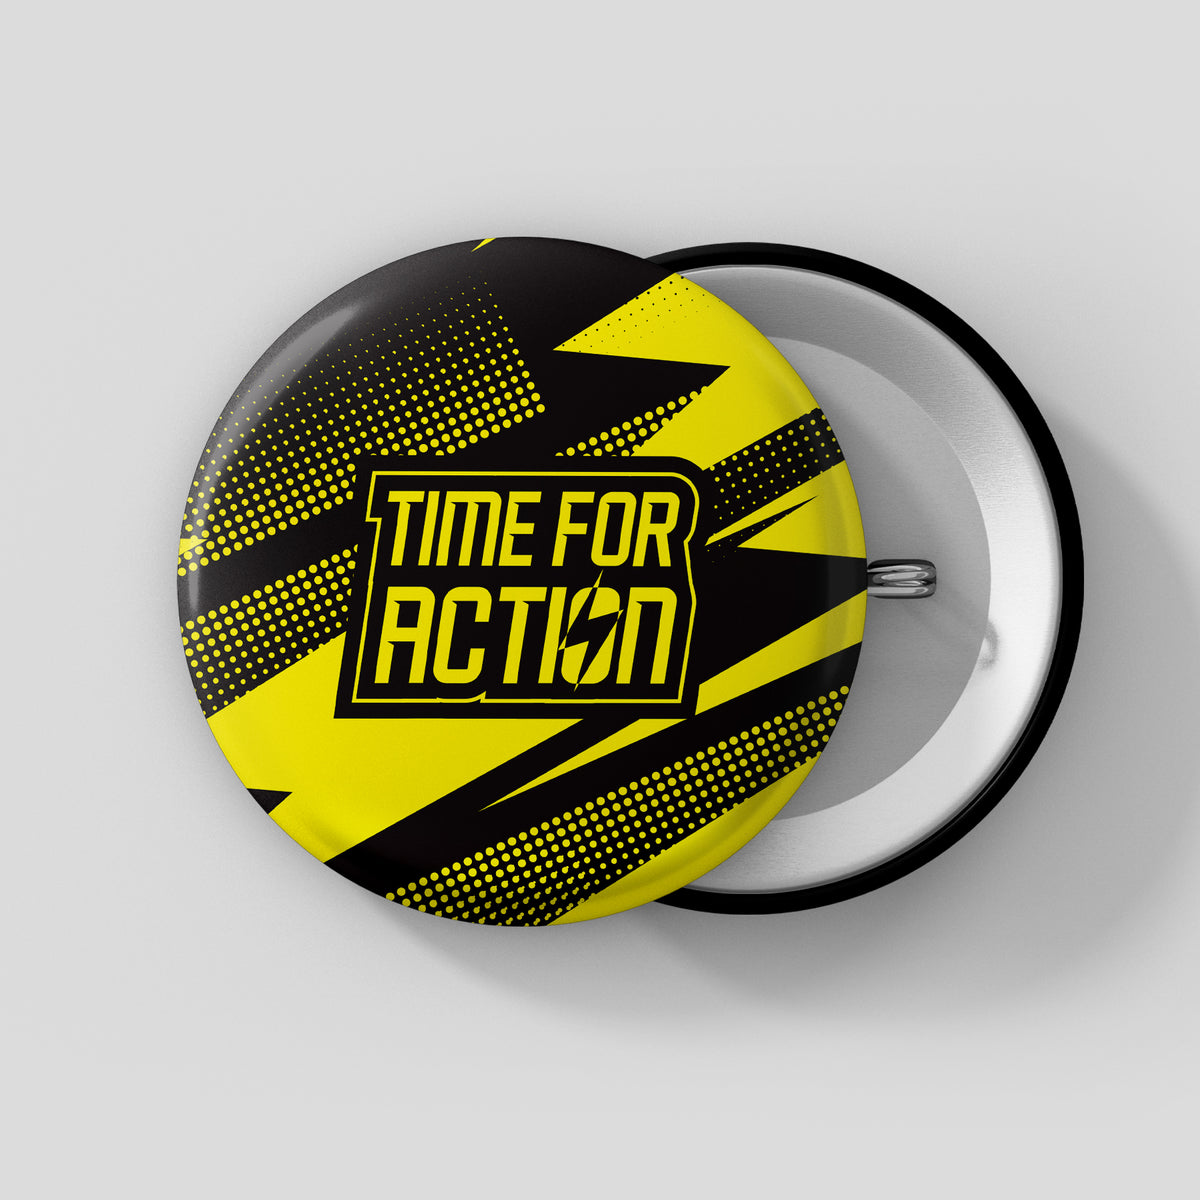 TIME FOR ACTION BUTTON BADGE